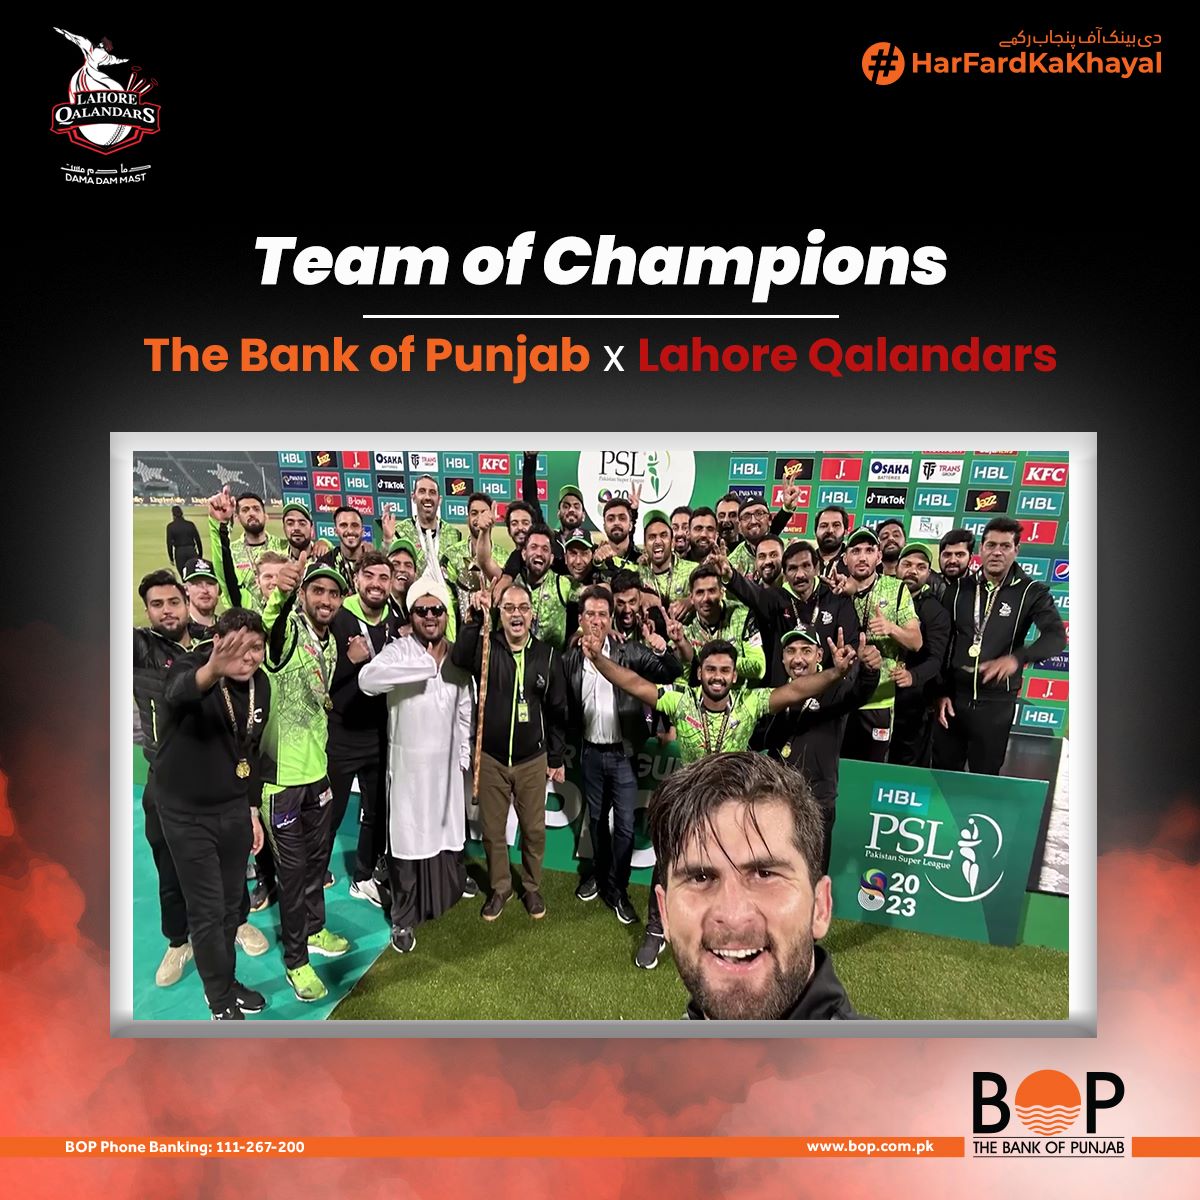 #TheBankOfPunjab is proud to be the official partner of the PSL Season 8 Champions - @lahoreqalandars!
Together, we have proved to be a winning #TeamOfChampions! Congratulations to the Lahore Qalandars for their remarkable performance!

 #HarFardKaKhayal #BOPkayQalandars #PSL8